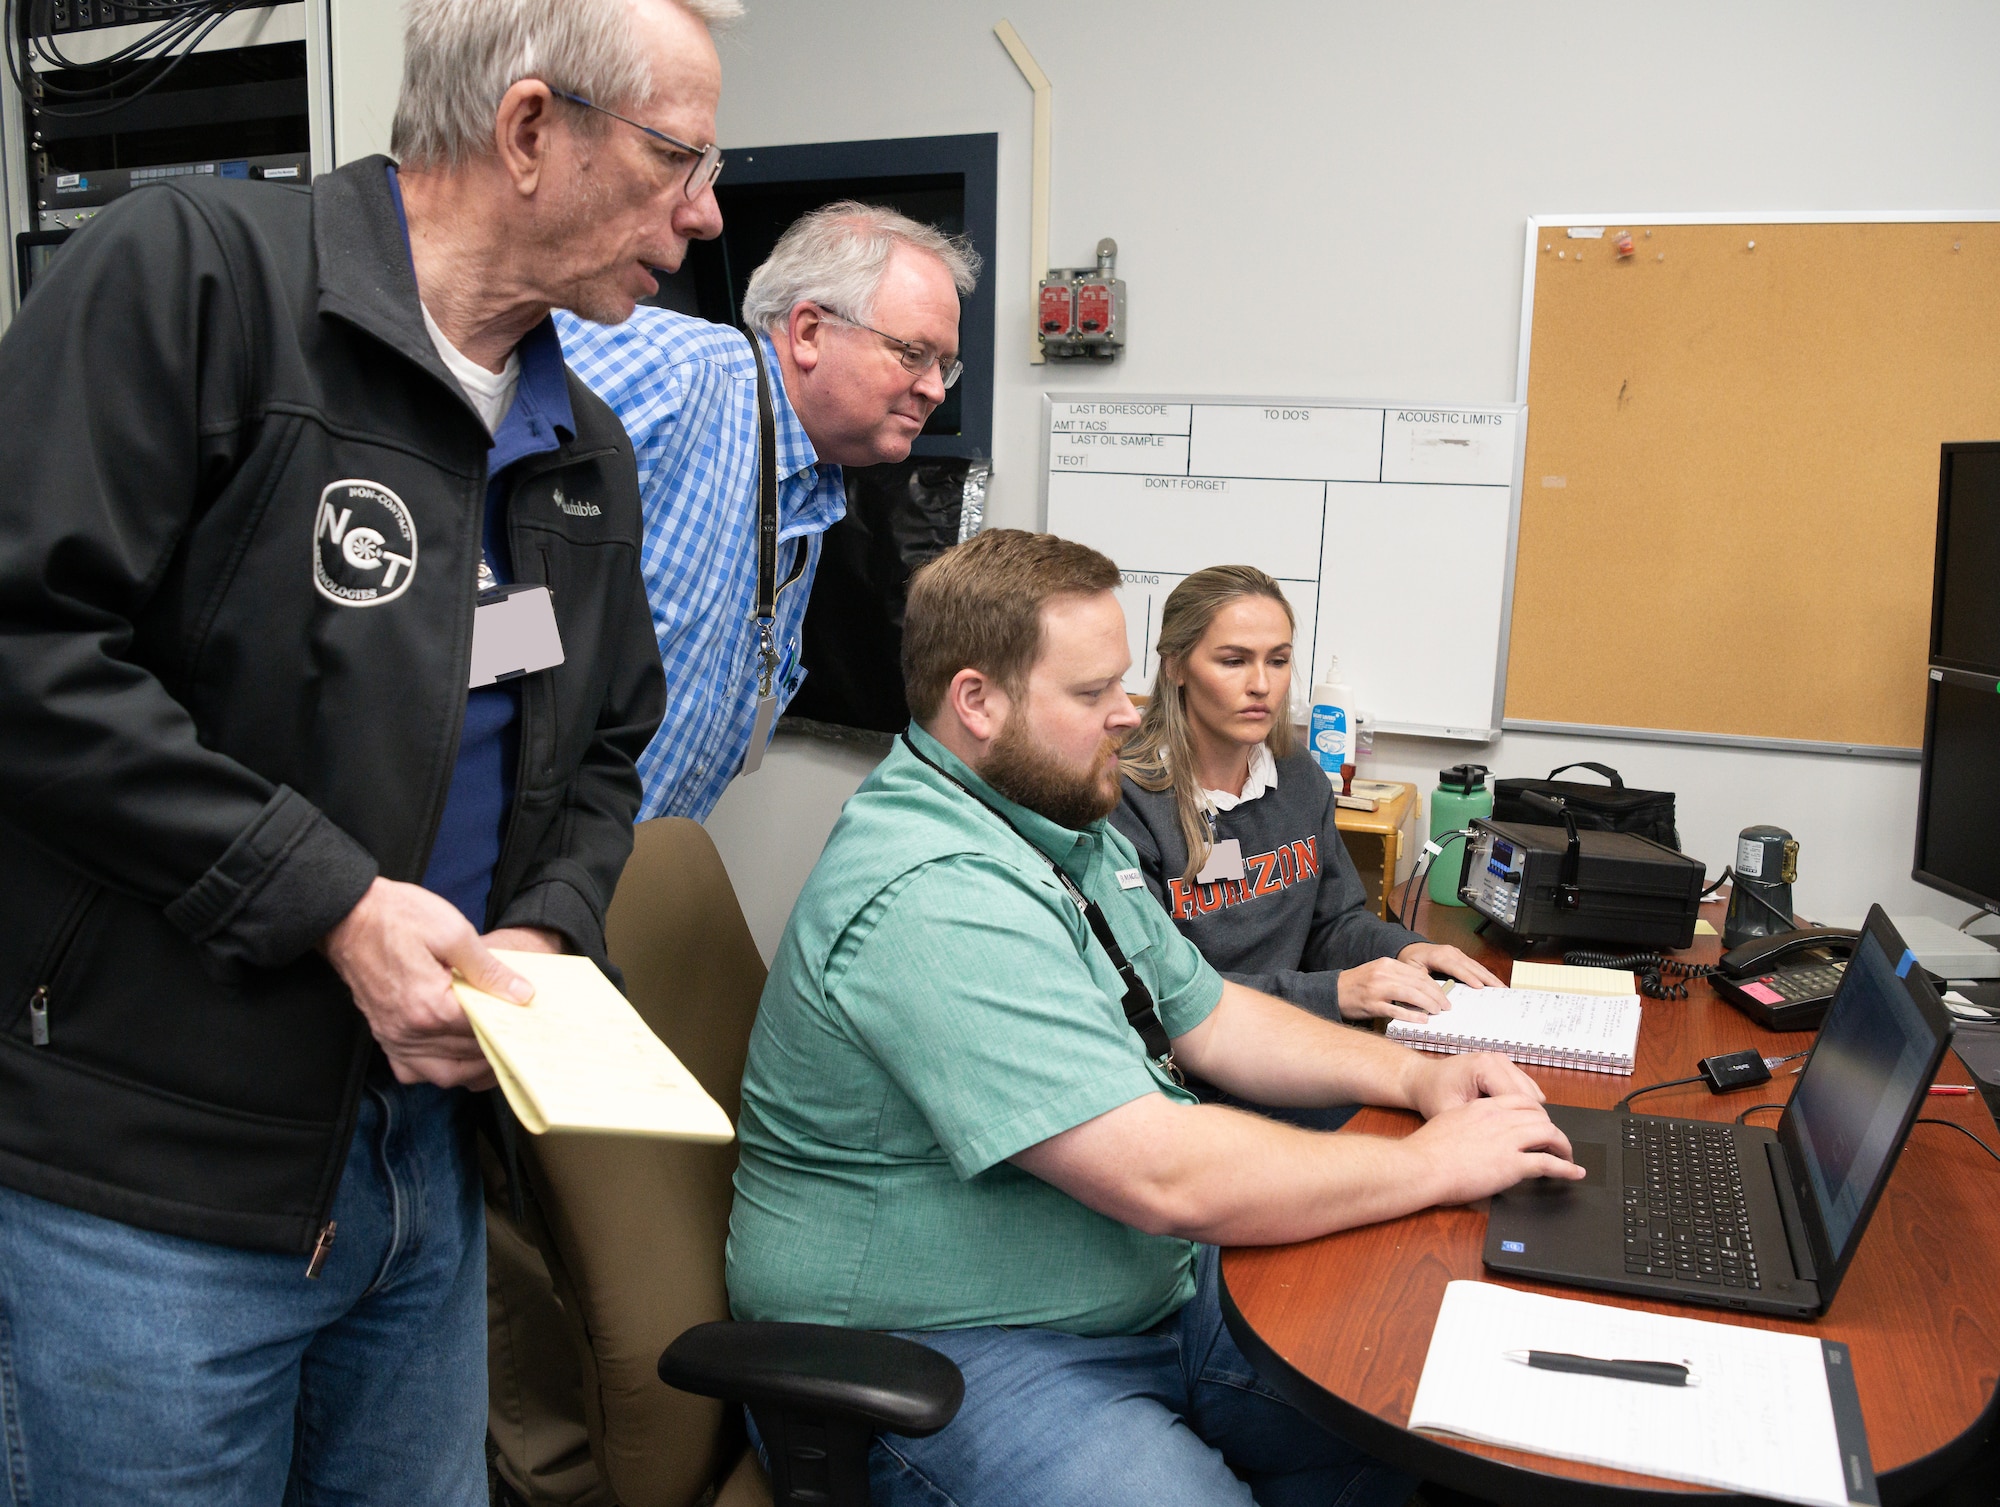 From left, Terry Hayes, vice president and chief technical officer of Non-Contact Technologies, LLC; Steve Arnold, technical adviser for the 717th Test Squadron, 804th Test Group, Arnold Engineering Development Complex; Dr. Phil Kreth, an assistant professor with the University of Tennessee Space Institute (UTSI); and Haley Goldston, a research assistant with UTSI, look at shadowgraph data during an experiment in SL-2.